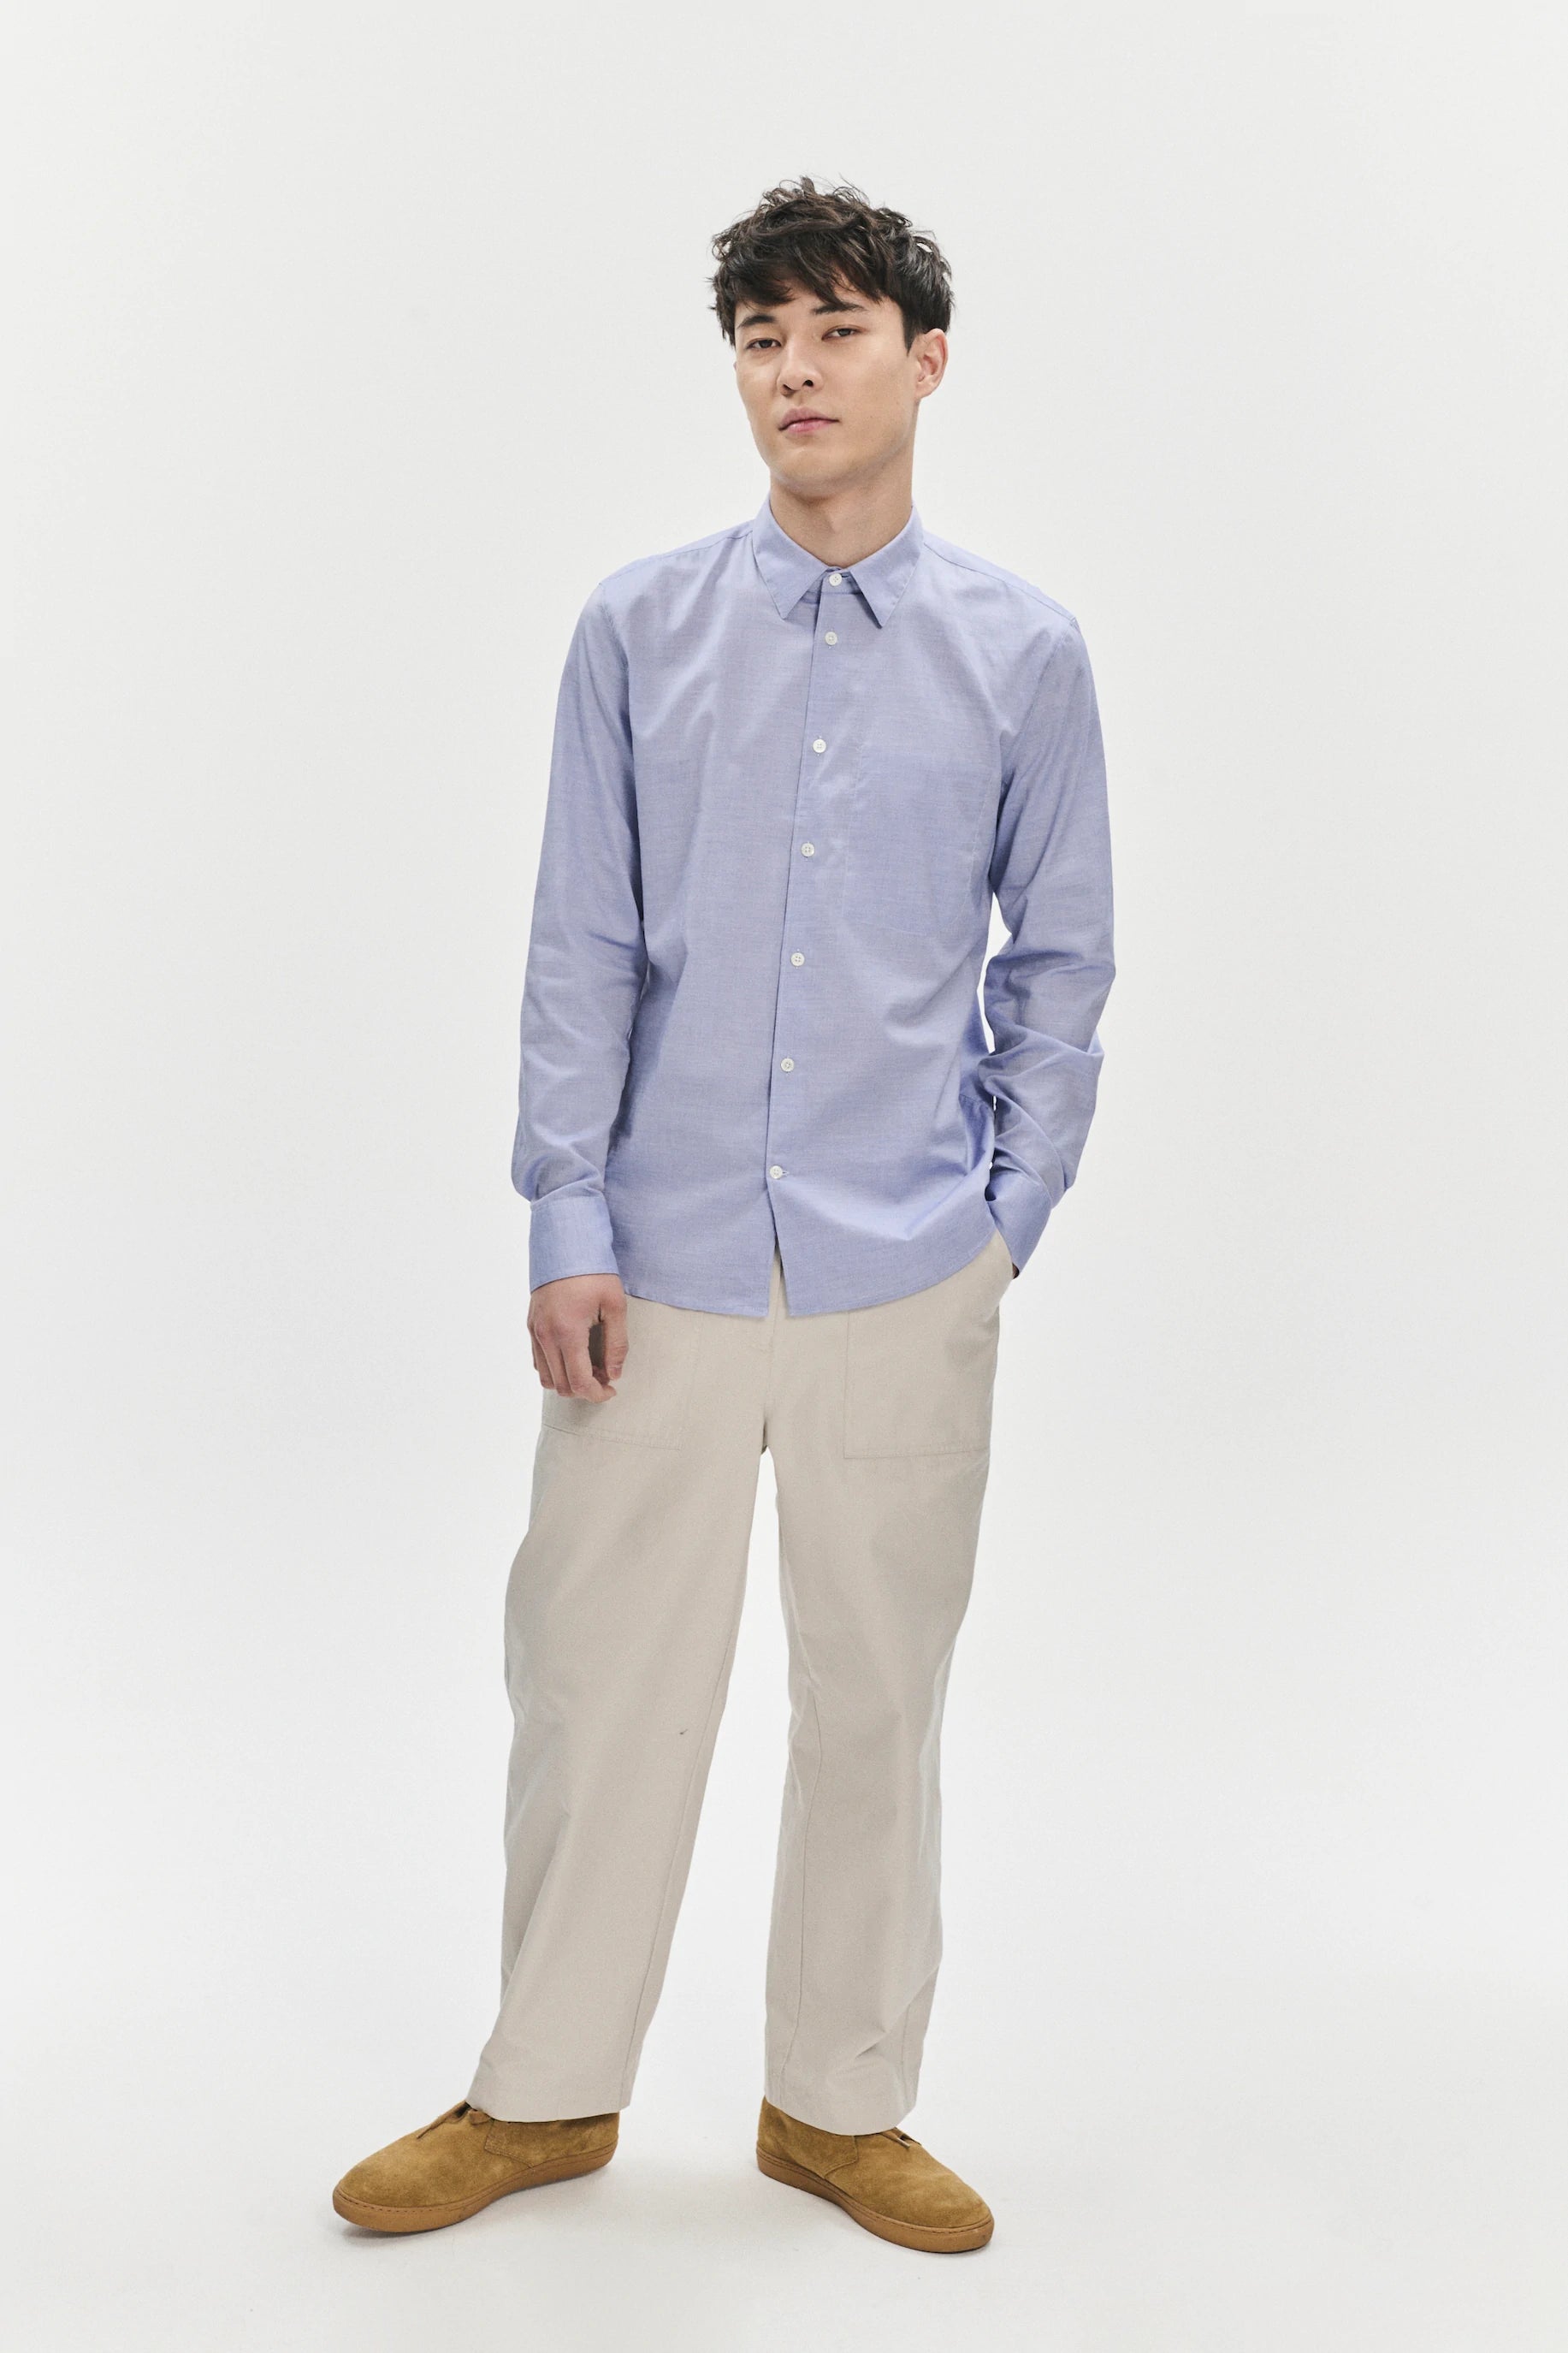 feel-good-shirt-in-the-finest-mini-structure-lilac-pale-blue-italian-cotton-by-albini